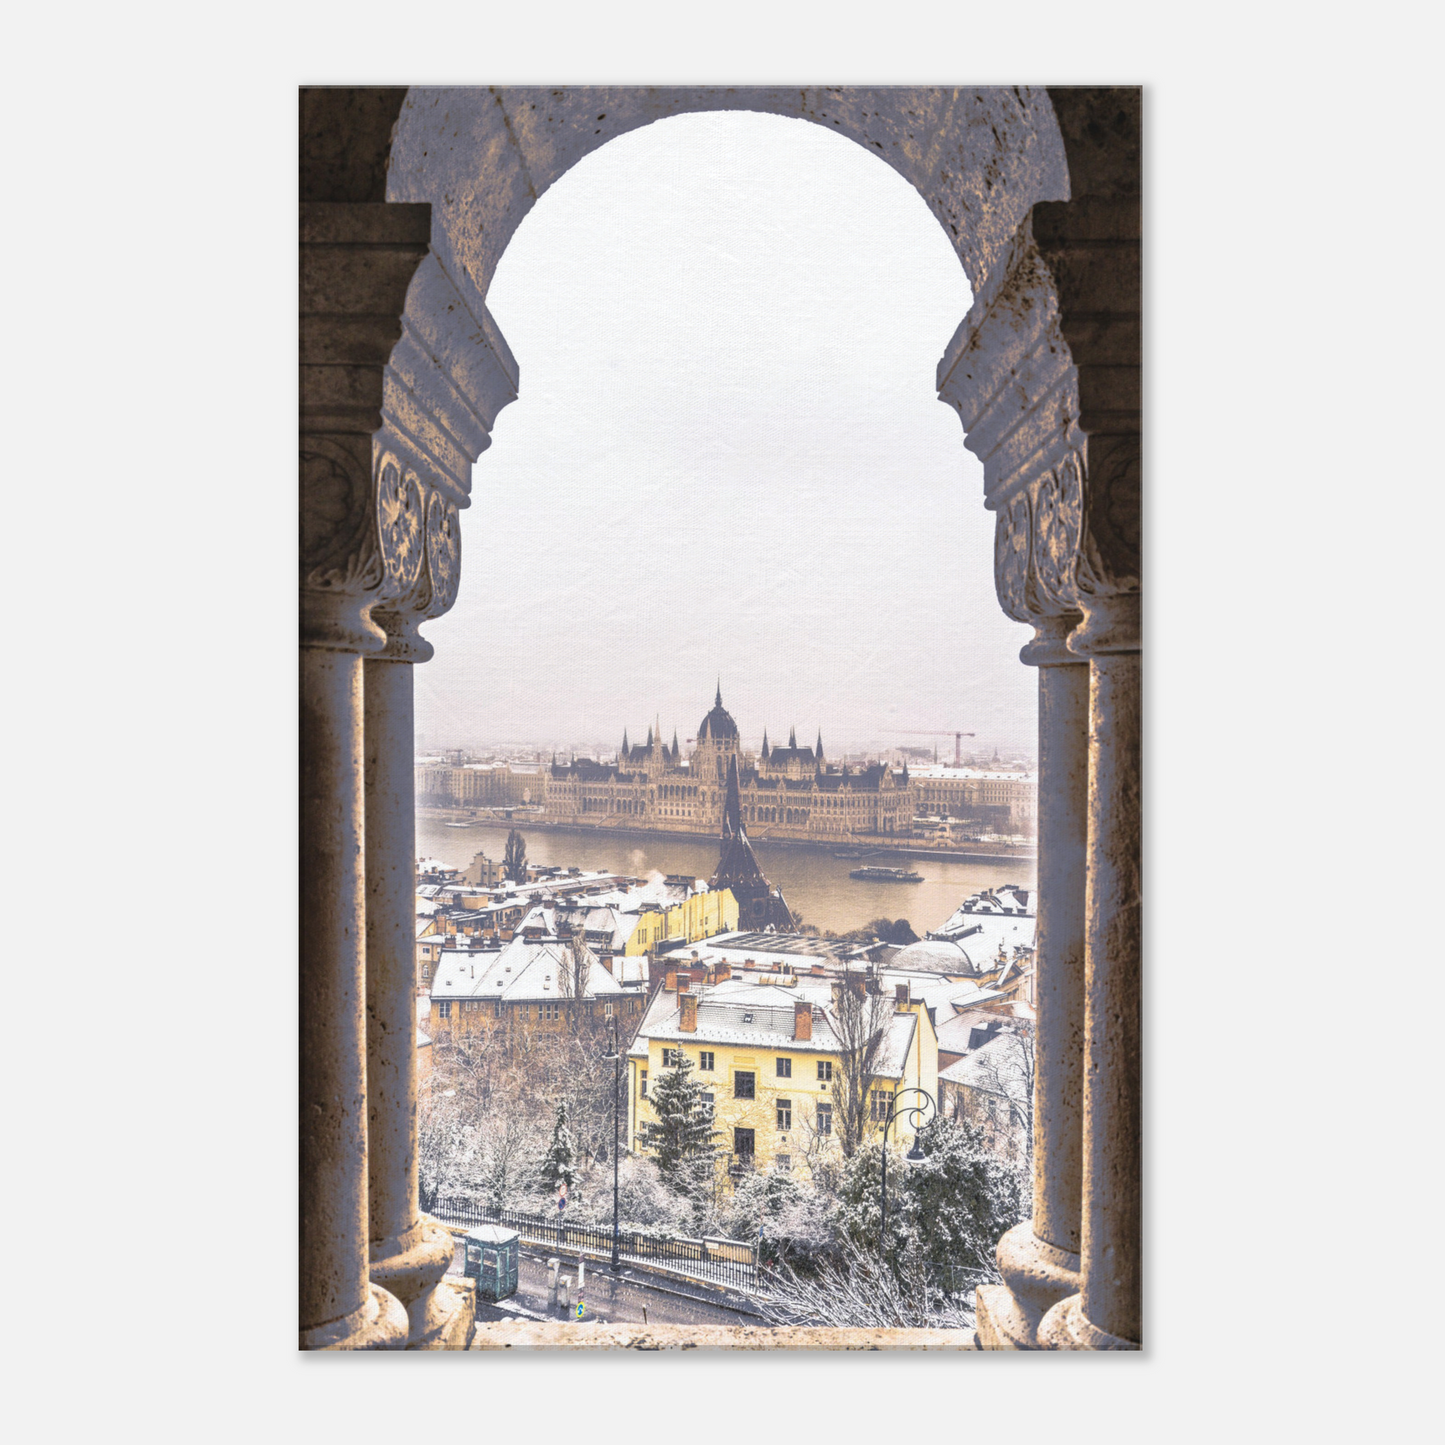 Danube Series - Fisherman’s Bastion Overlooking Budapest (Gallery-Wrapped Canvas or Aluminum Print)